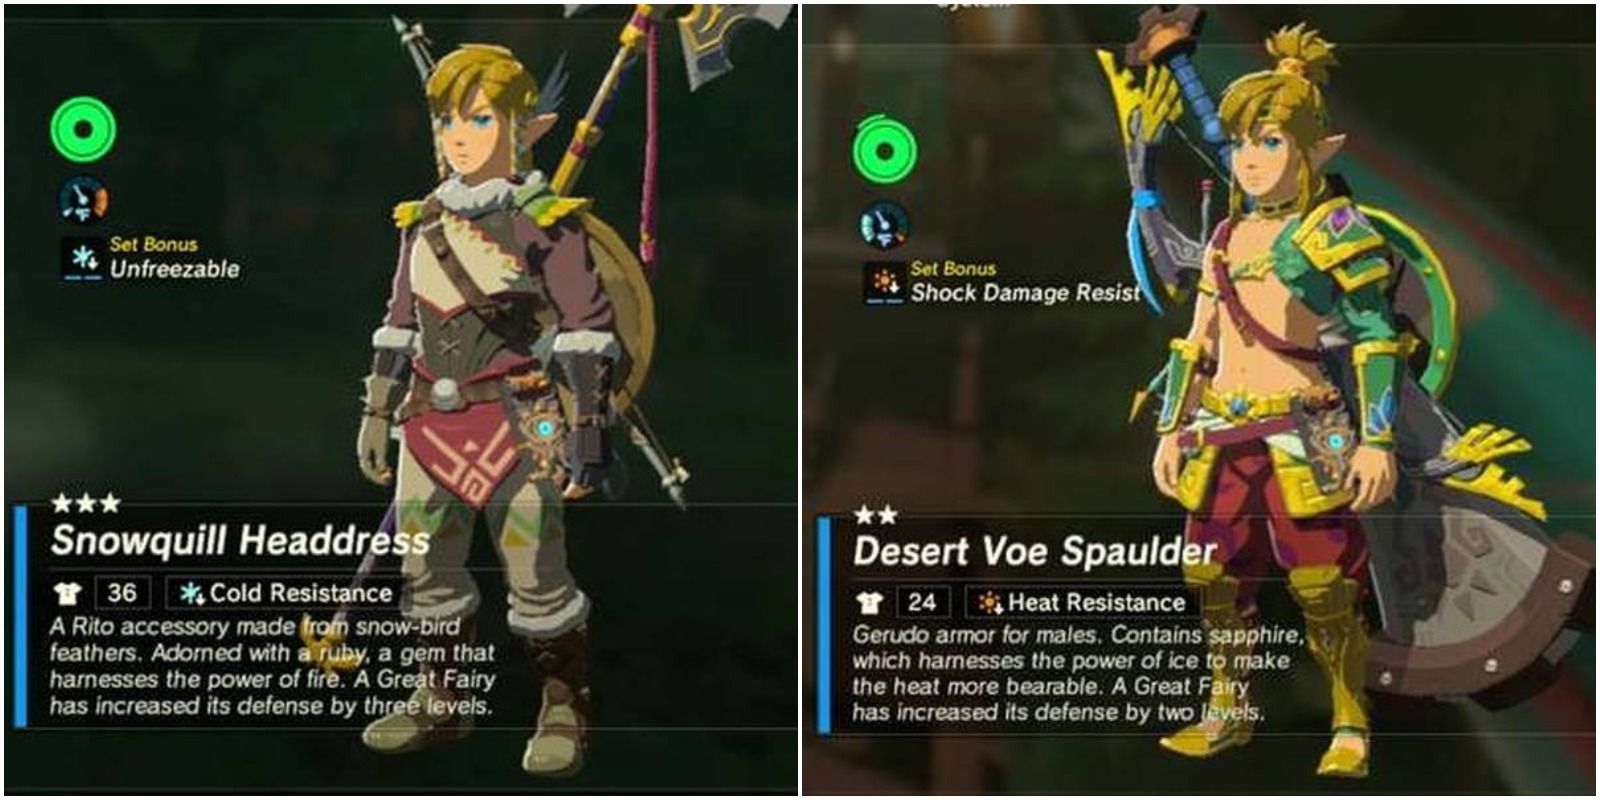 Link wearing the Snowquill armor (left) and Desert Voe armor (right)